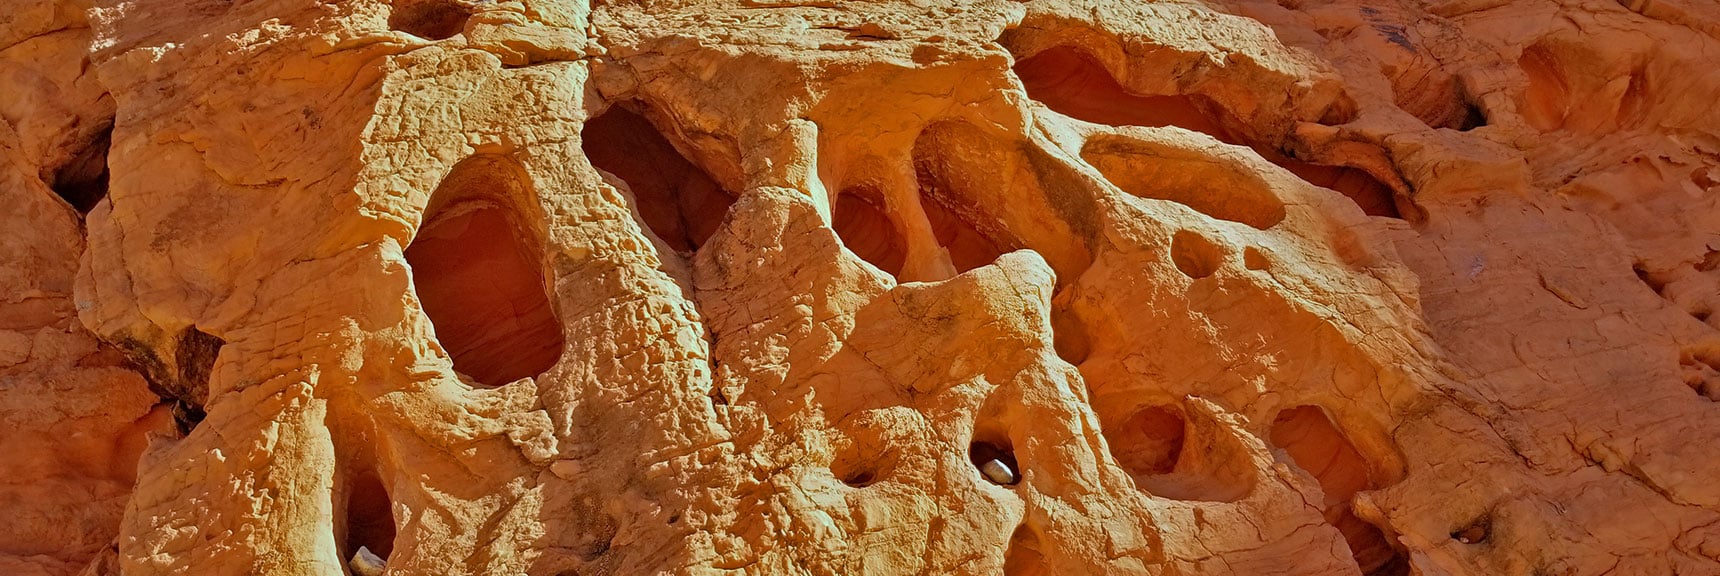 Intricate Rock Formations on Natural Arches Trail, Valley of Fire State Park, Nevada